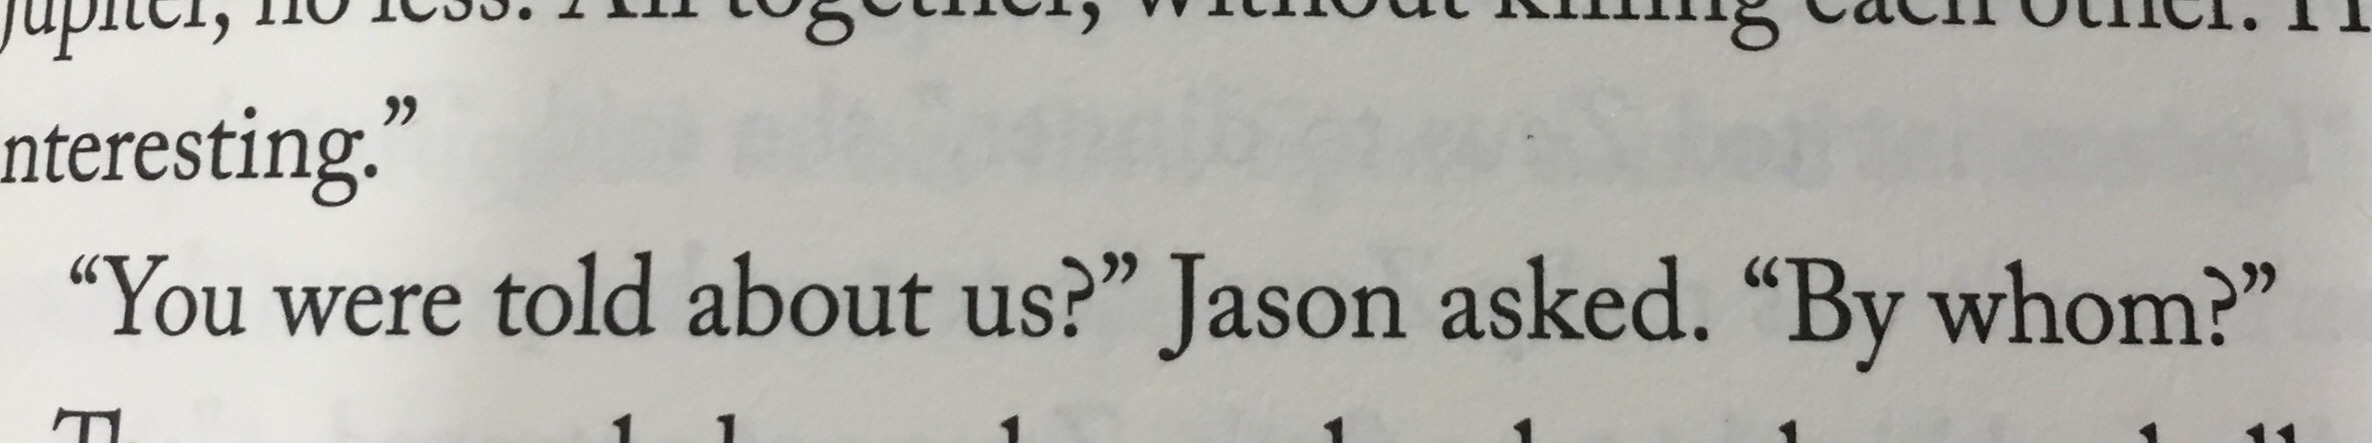 plaidshirtsandpancakes:
“ Jason “I may have been raised by wolves but at least I use proper grammar” Grace
”